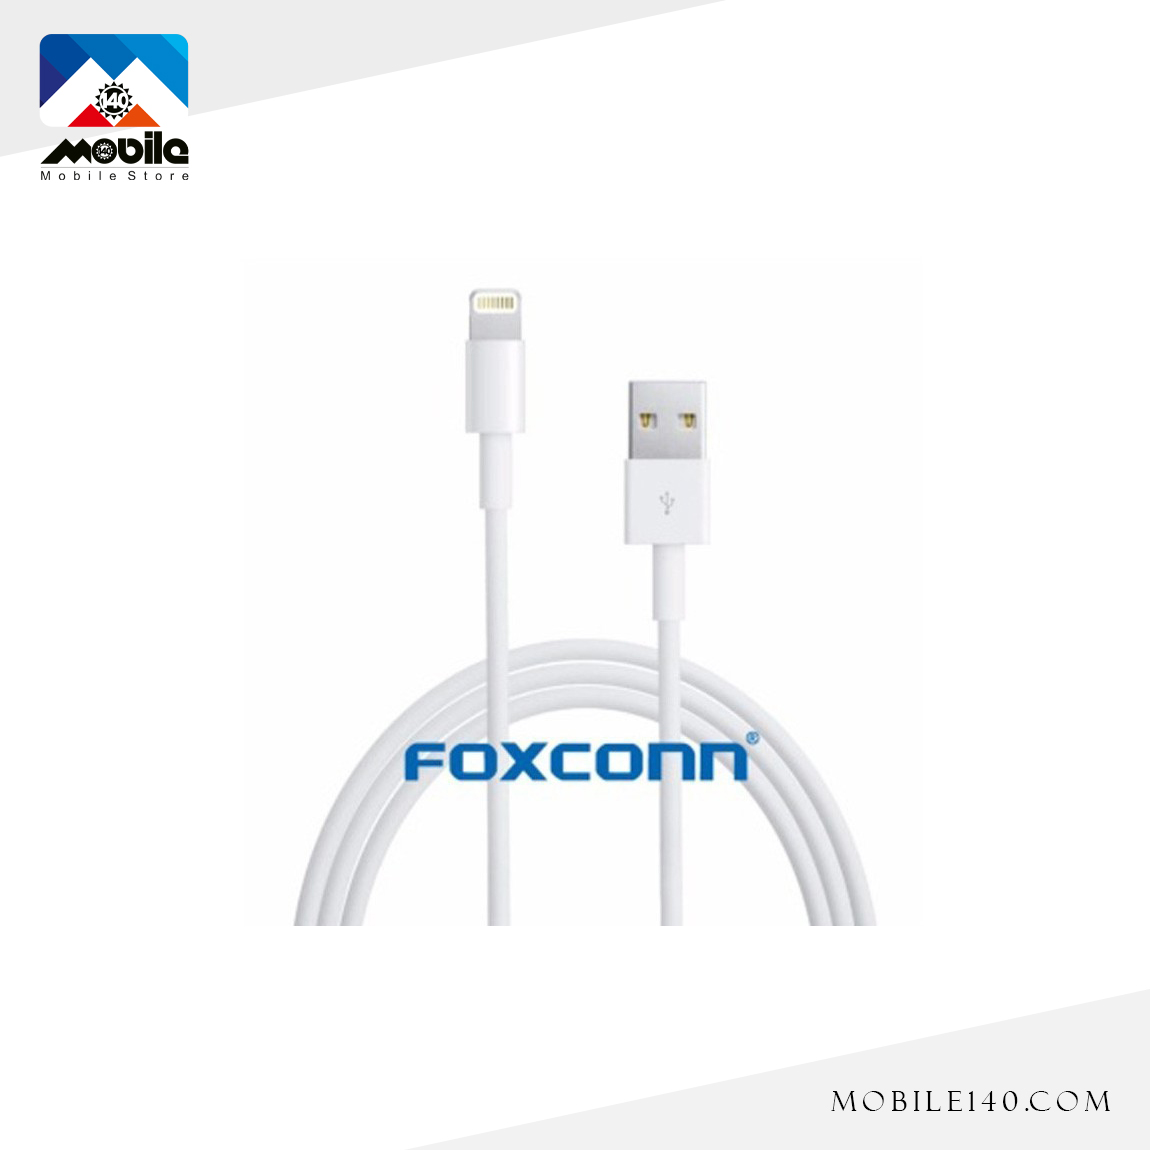 Foxconn Charging Cable for Apple iPhone 2